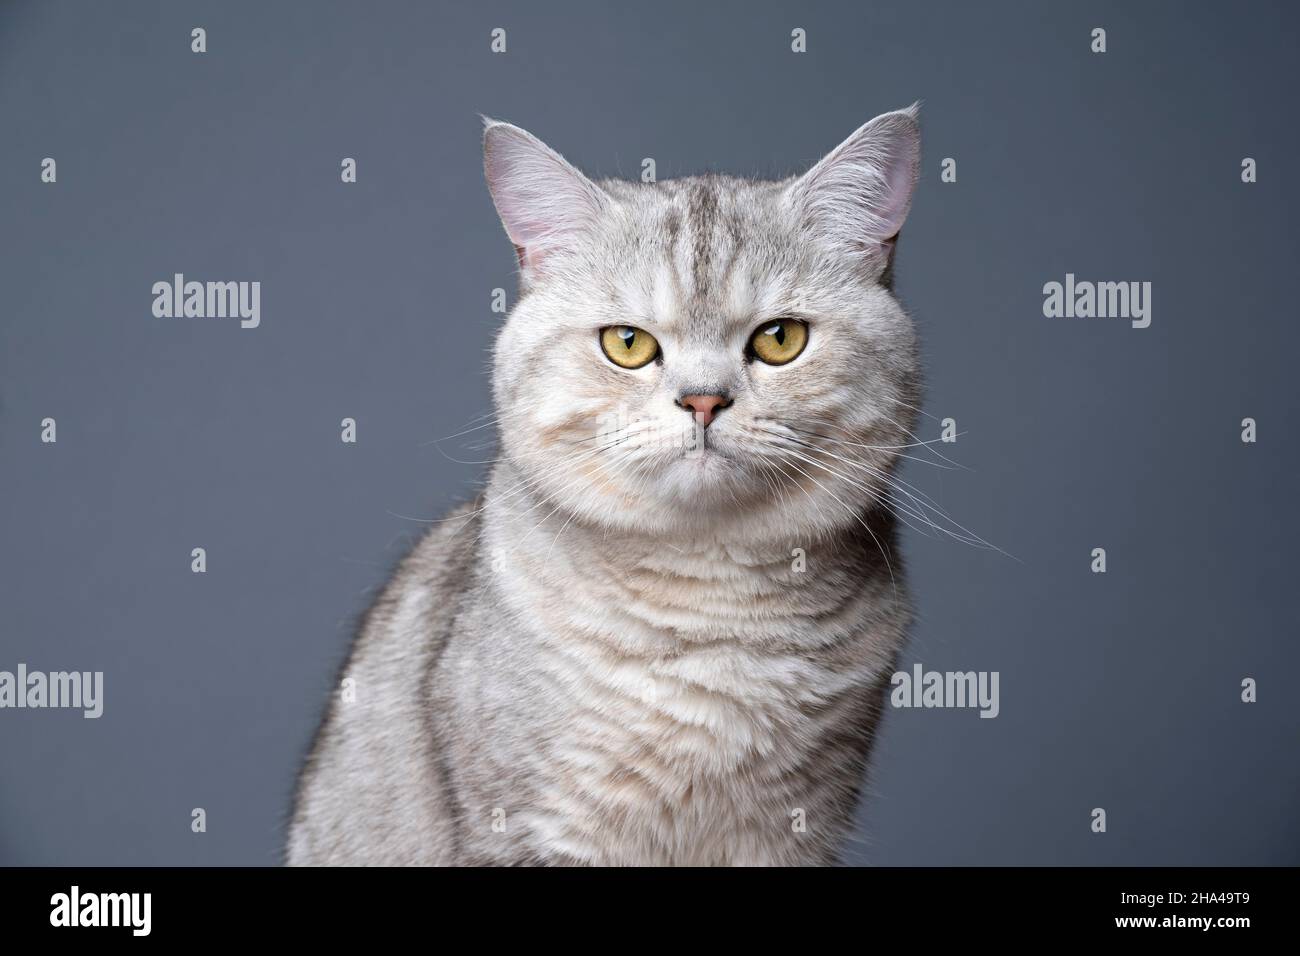 fluffy silver shaded tabby british shorthair cat with yellow eyes portrait on gray background Stock Photo